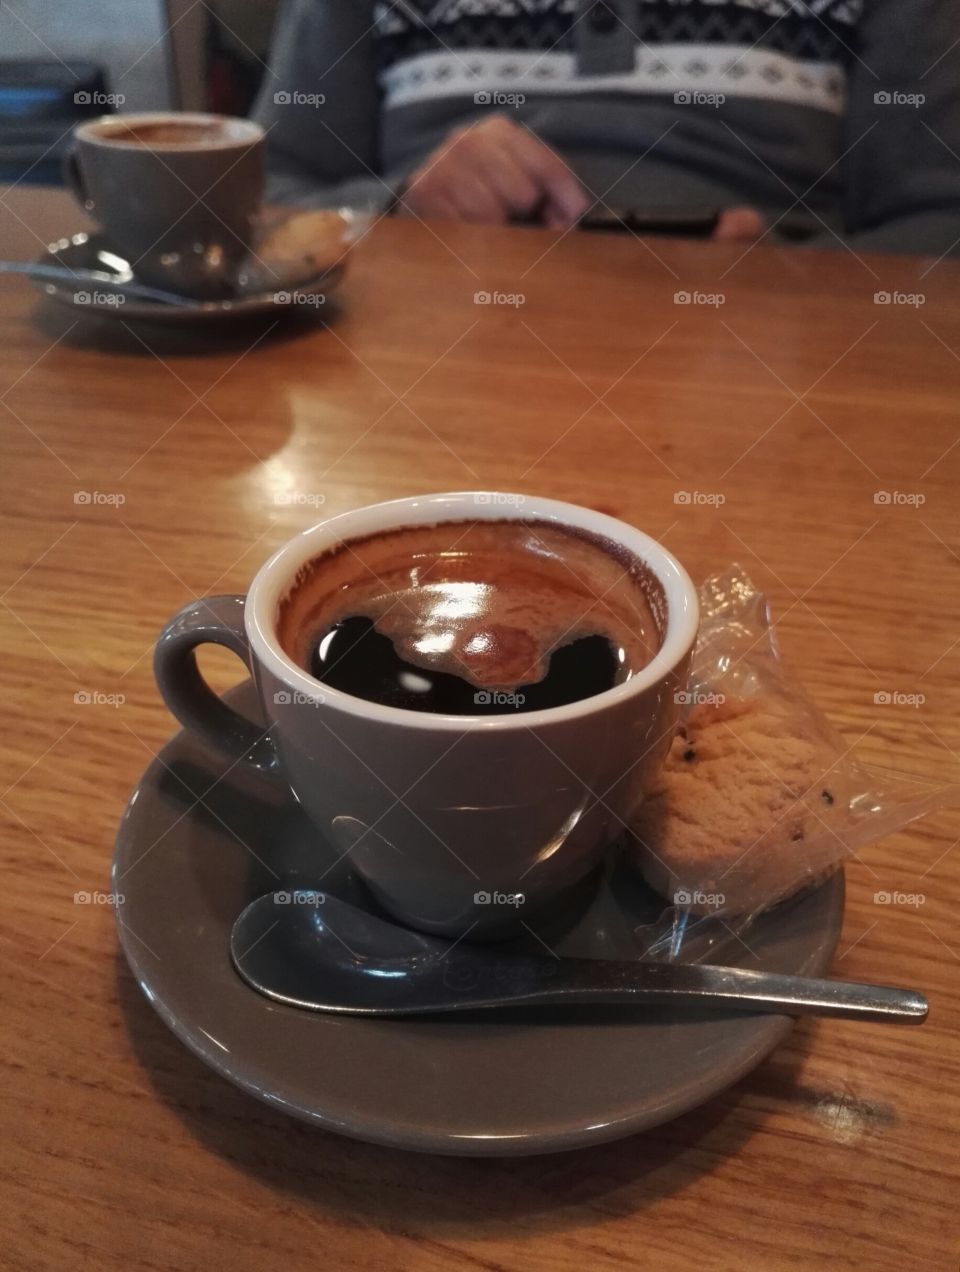 two espresso cups with spoon and cookie and a man with smarphone in the background